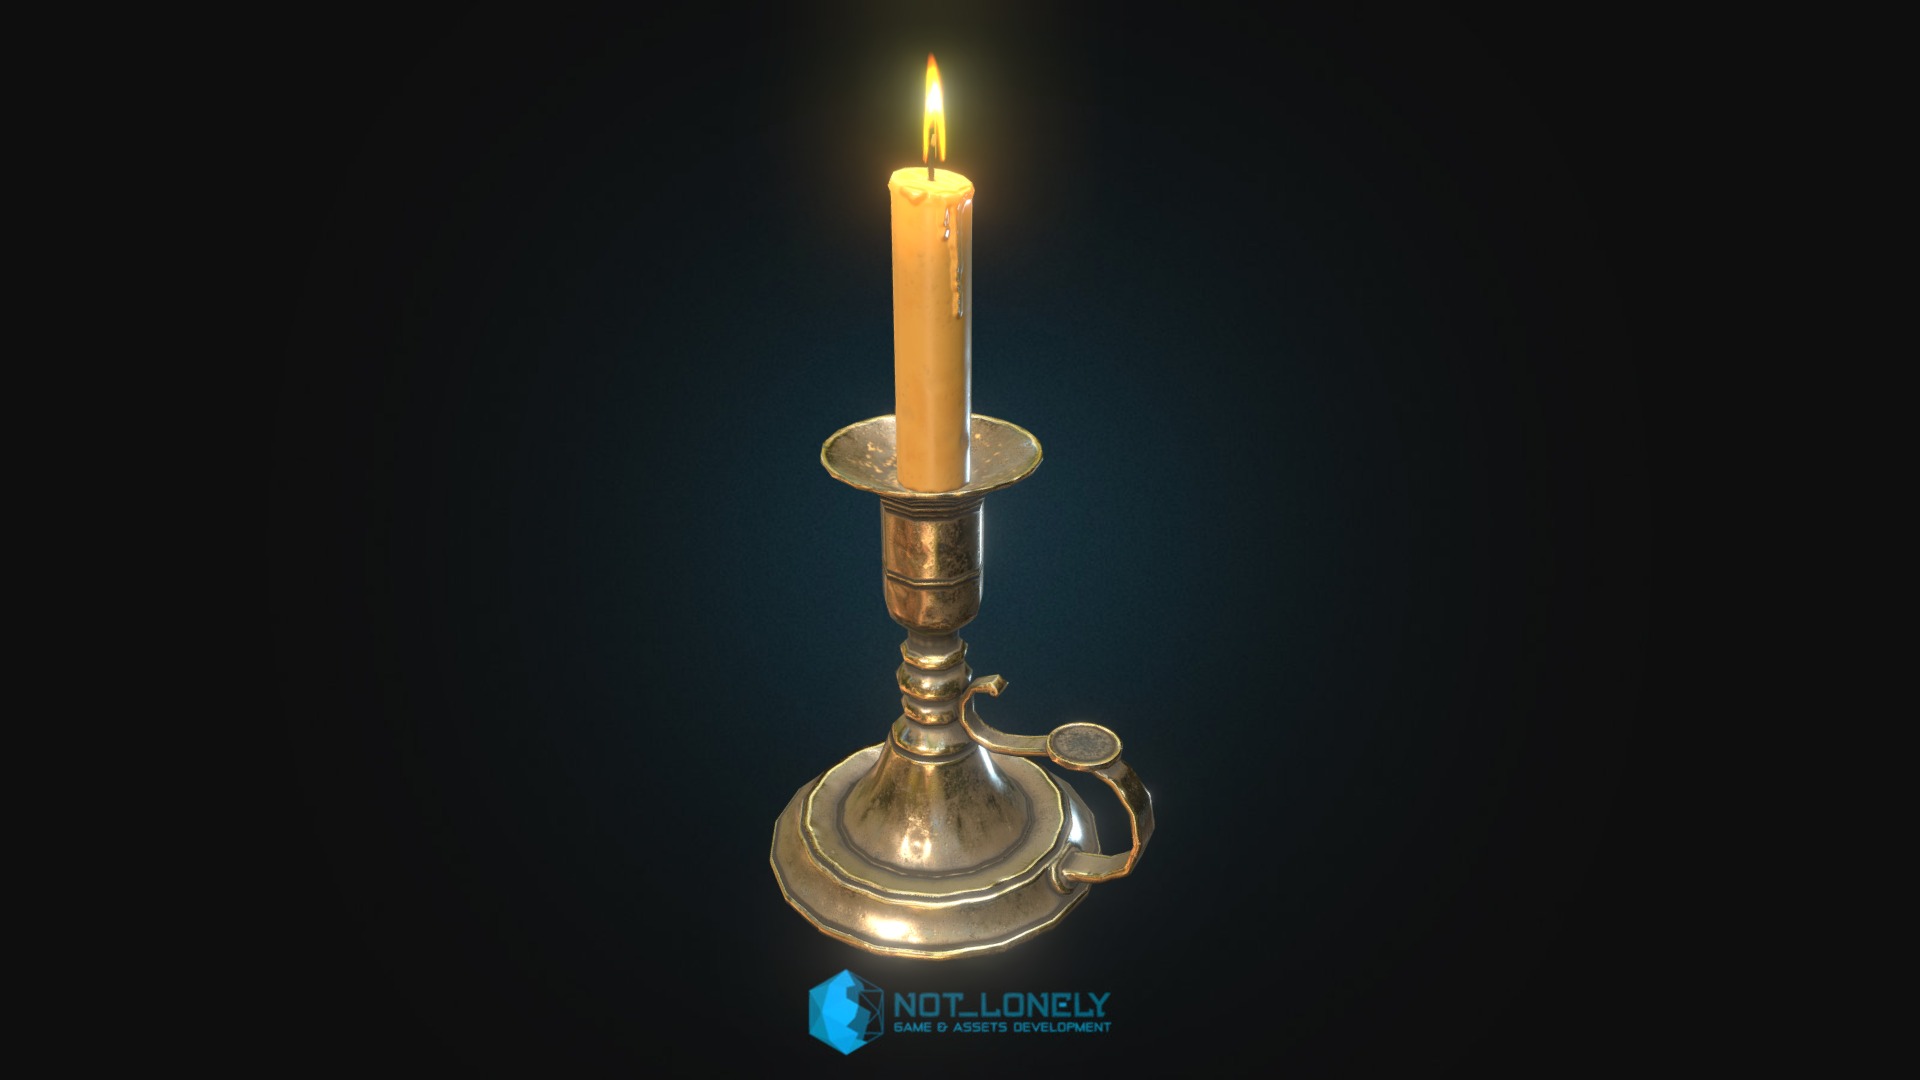 3D model Candlestick - This is a 3D model of the Candlestick. The 3D model is about a lit candle on a stand.